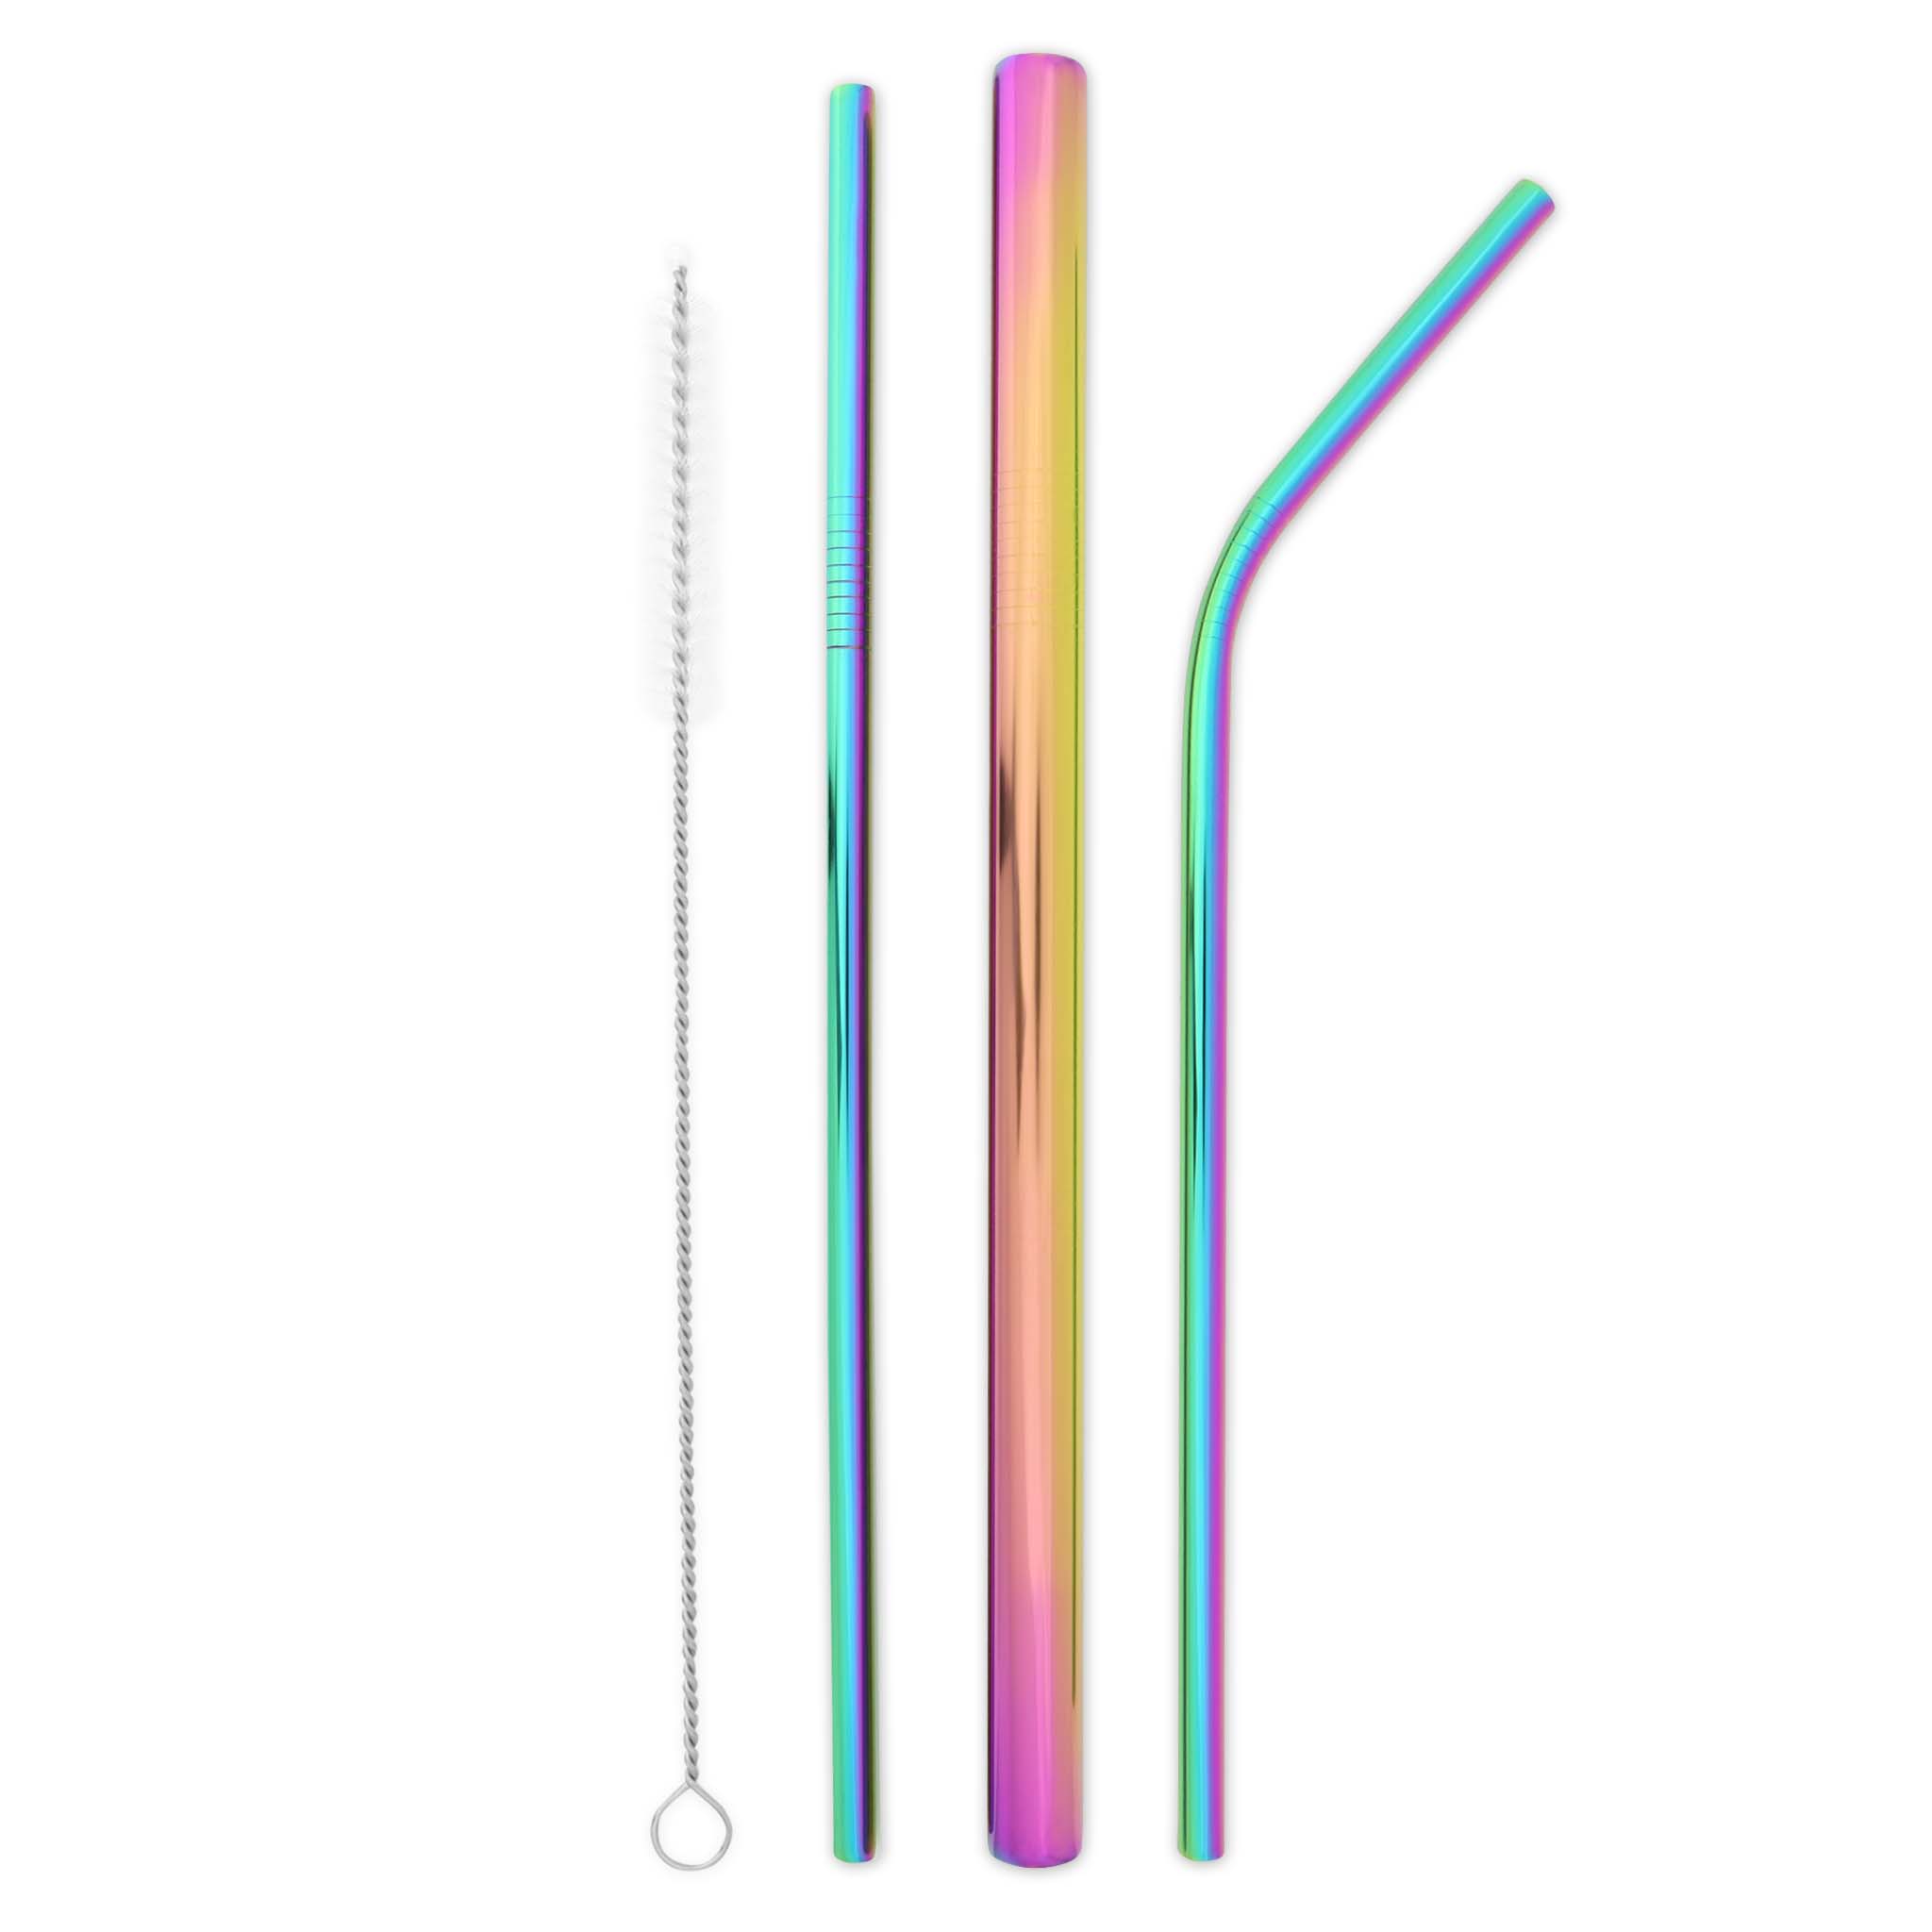 Triple Threat Stainless Steel Straw Set with Travel Pouch (Rainbow)